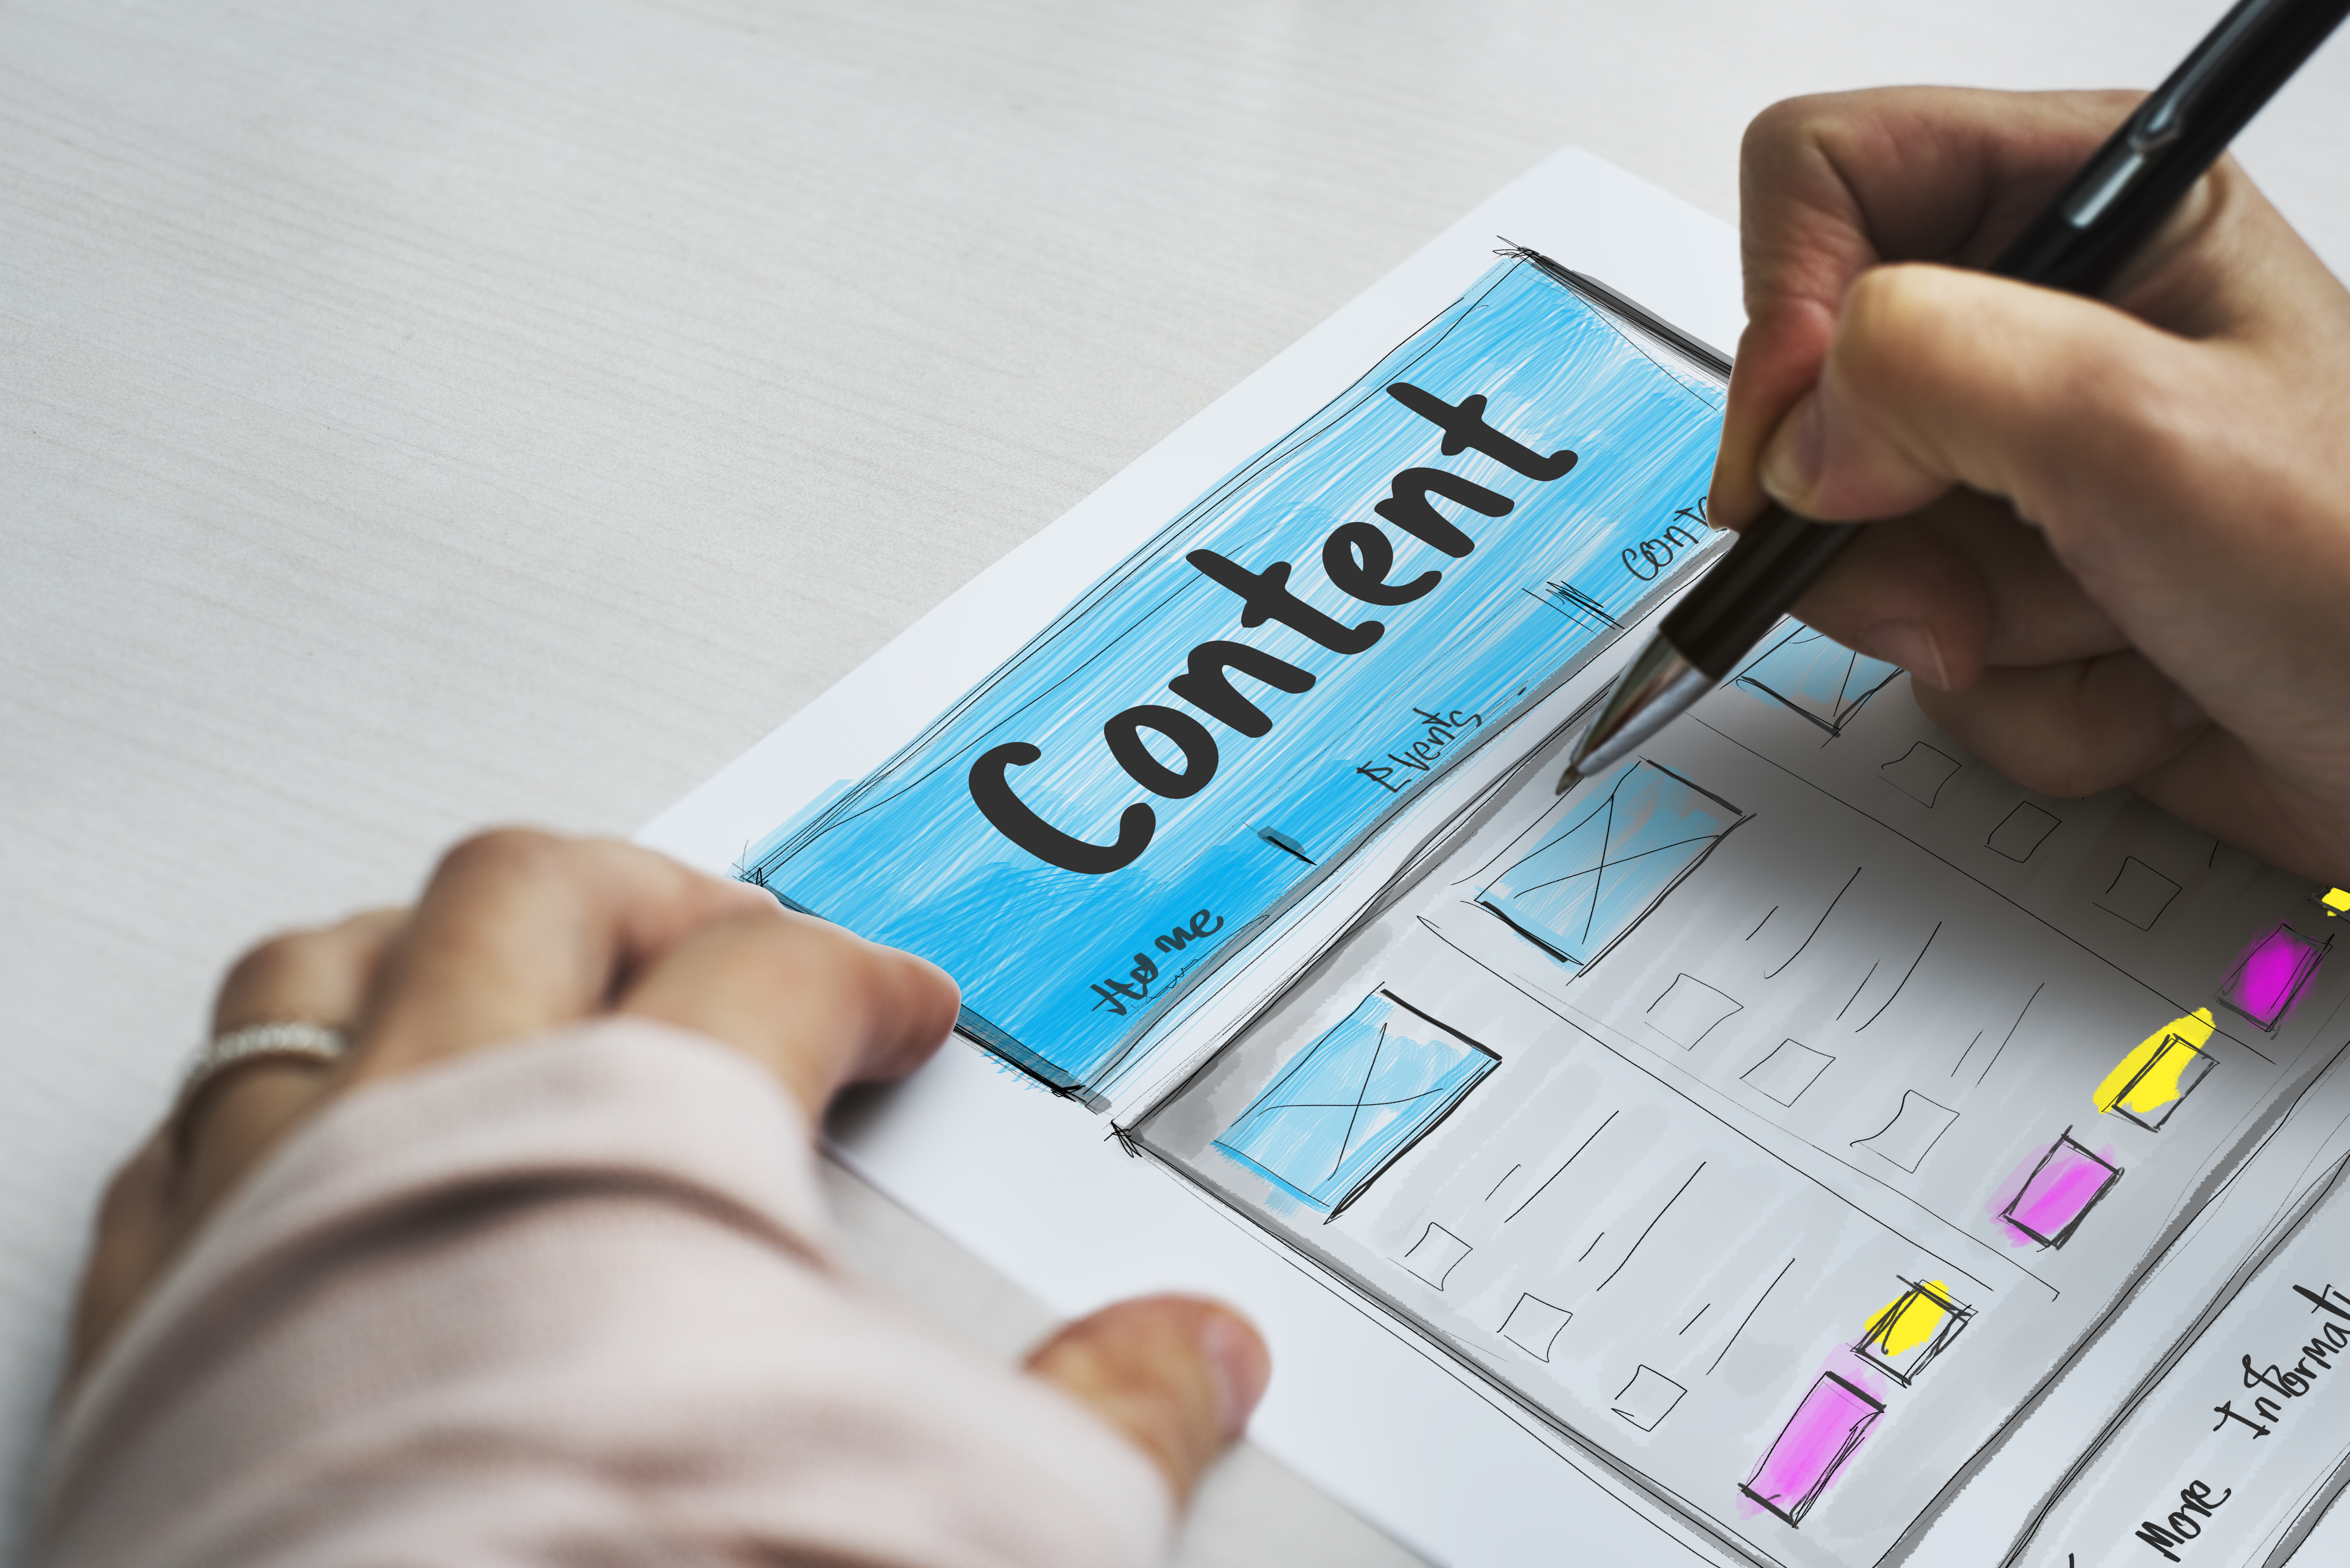 The guideline for successful recruiting content marketing